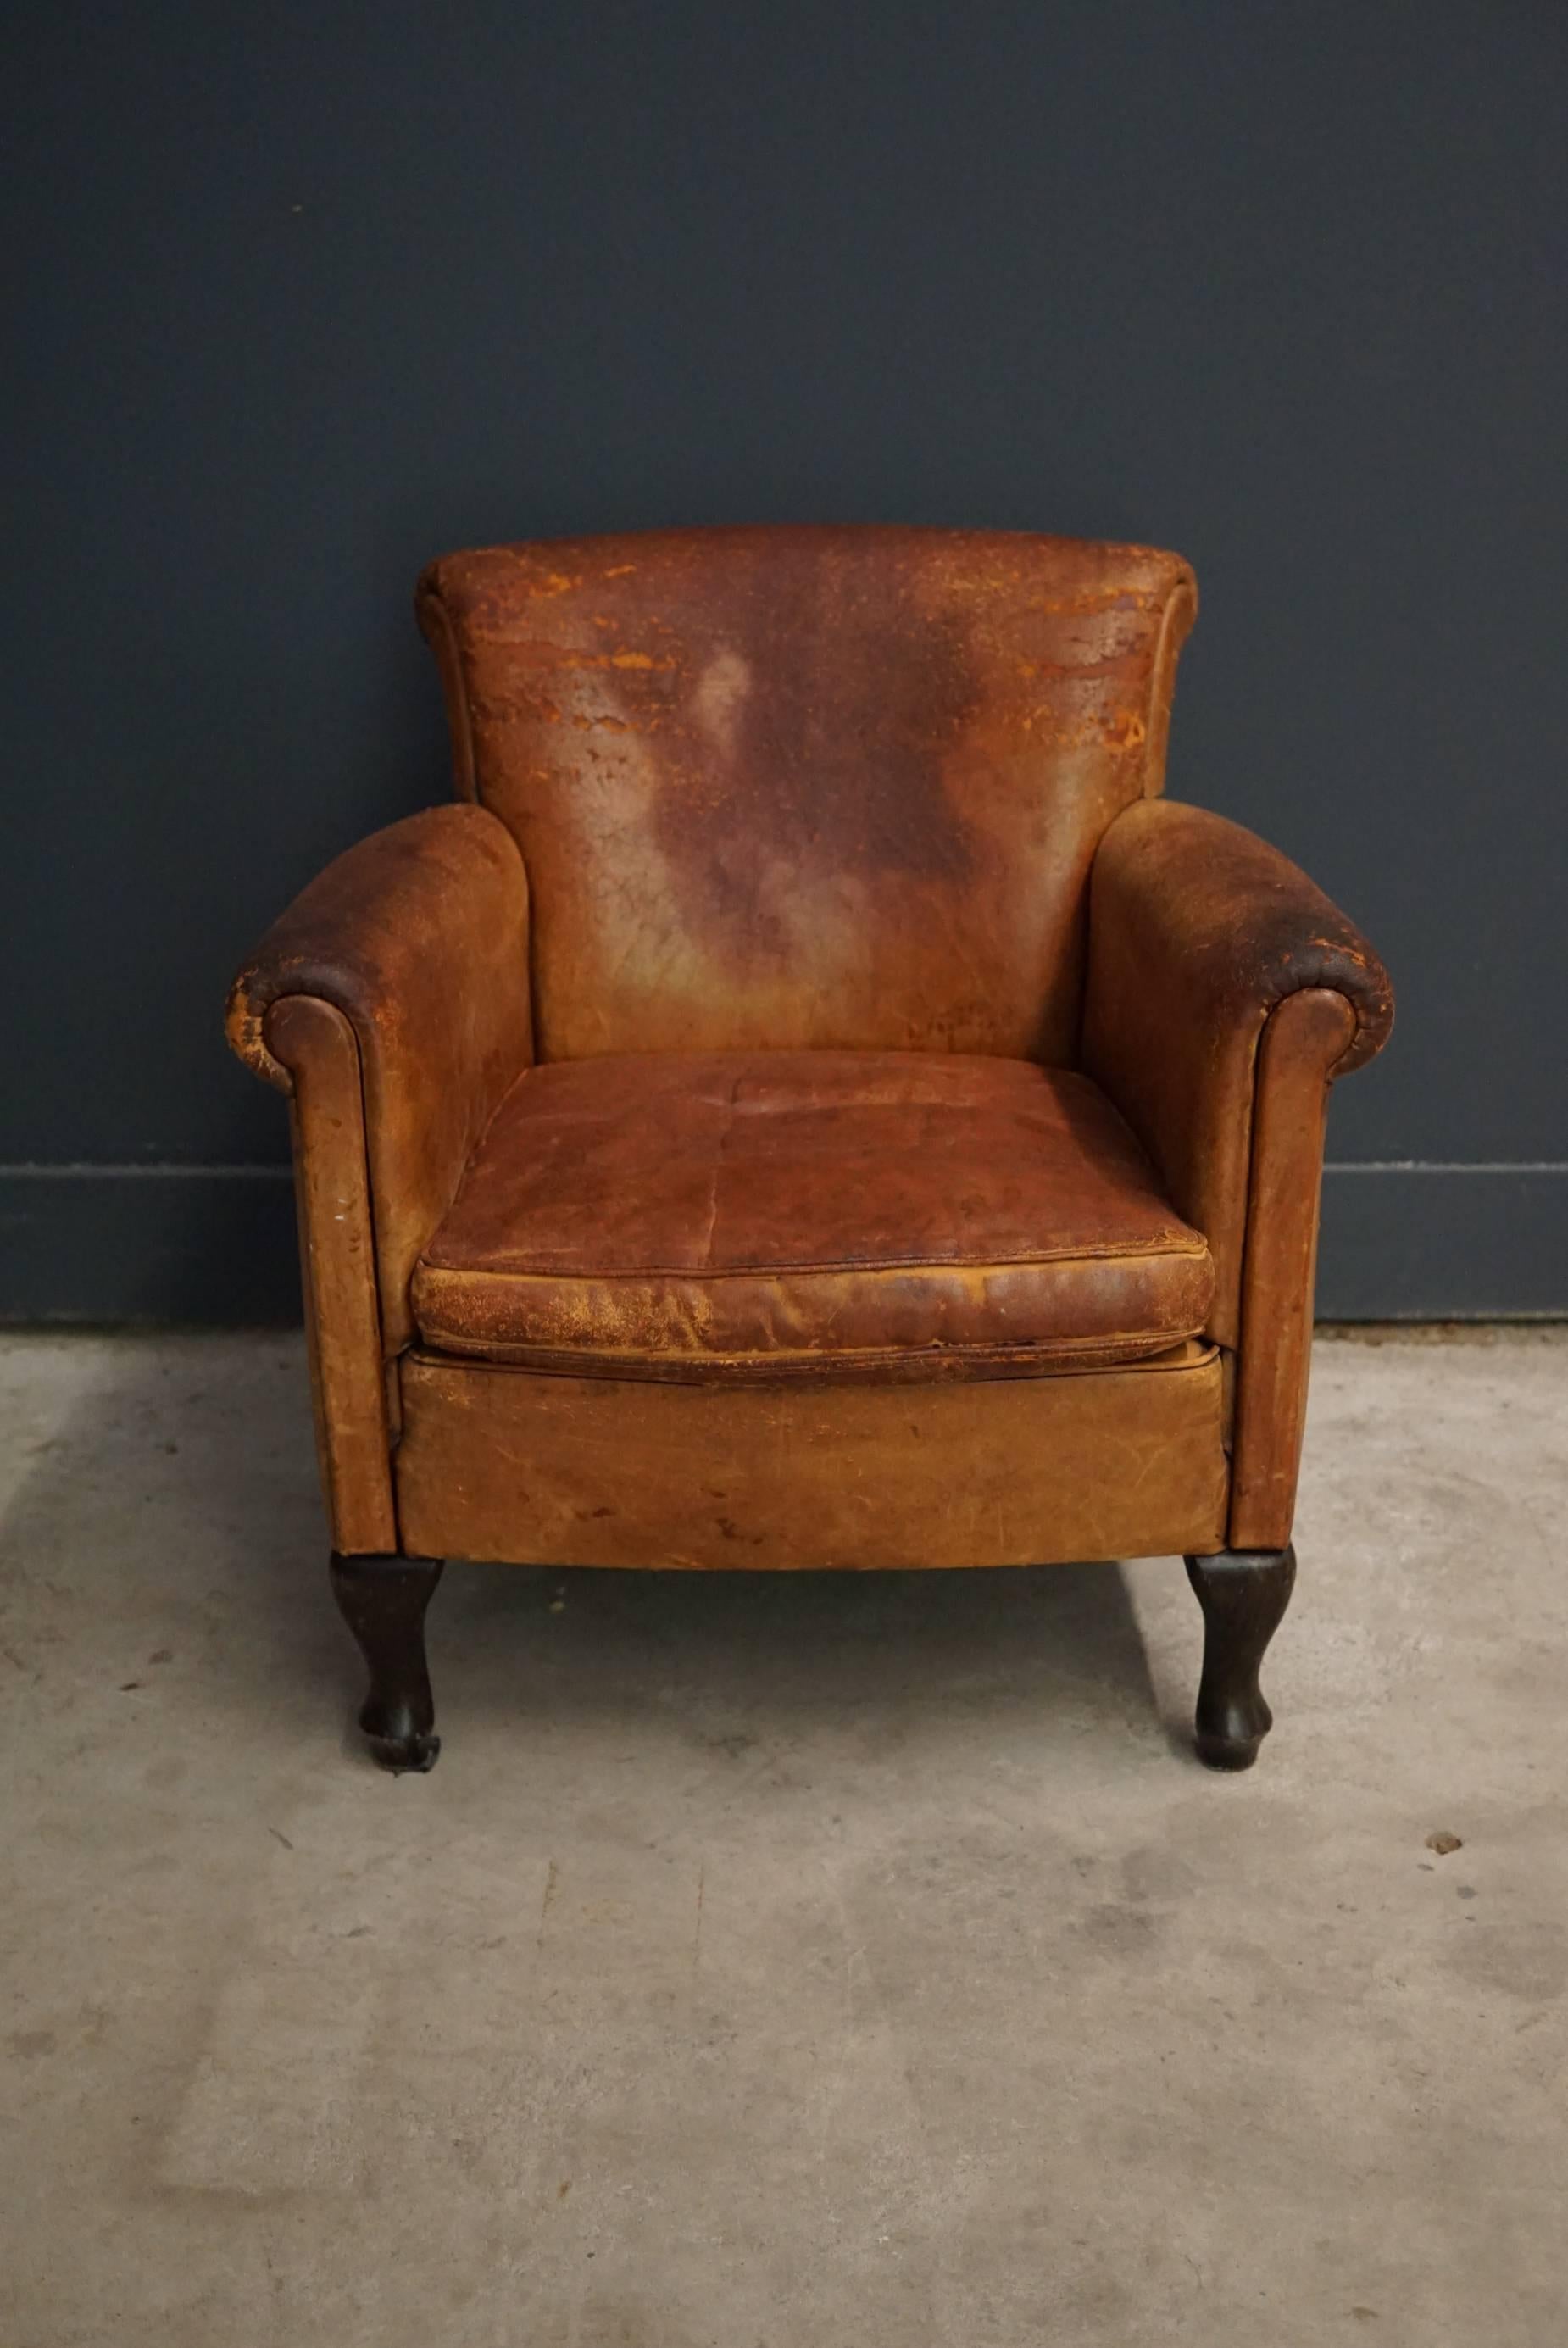 This club chair was designed and produced during the second half of the 20th century. The chair is made from cognac leather held together with metal pins and mounted on wooden legs. The lounge chair is in a vintage well used condition.